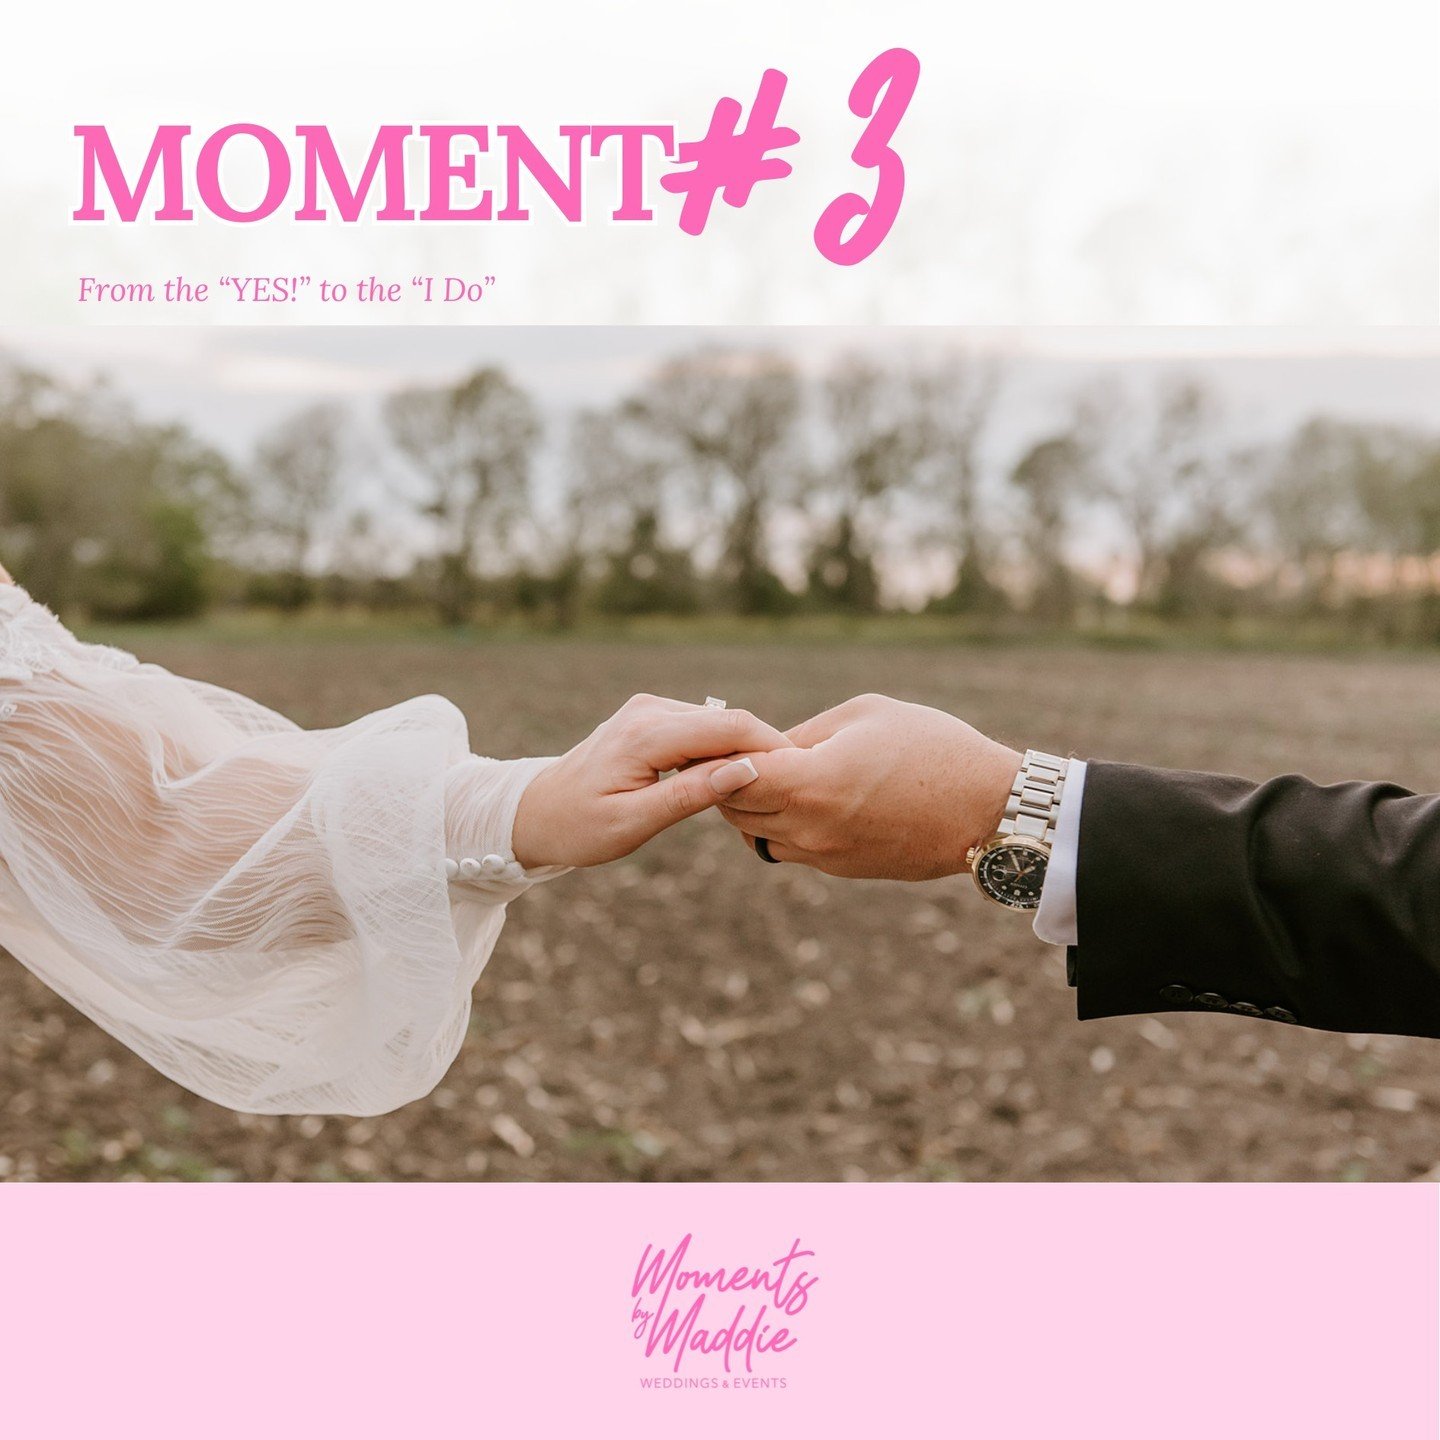 You are going to LOVE this if you are wanting help every step of the way!🥂💐

Moment #3 Includes:
-Creation of wedding website.
-Assist in finding, negotiating, and booking all vendors
(Including: officiant, catering, photography, bakery, florist, h